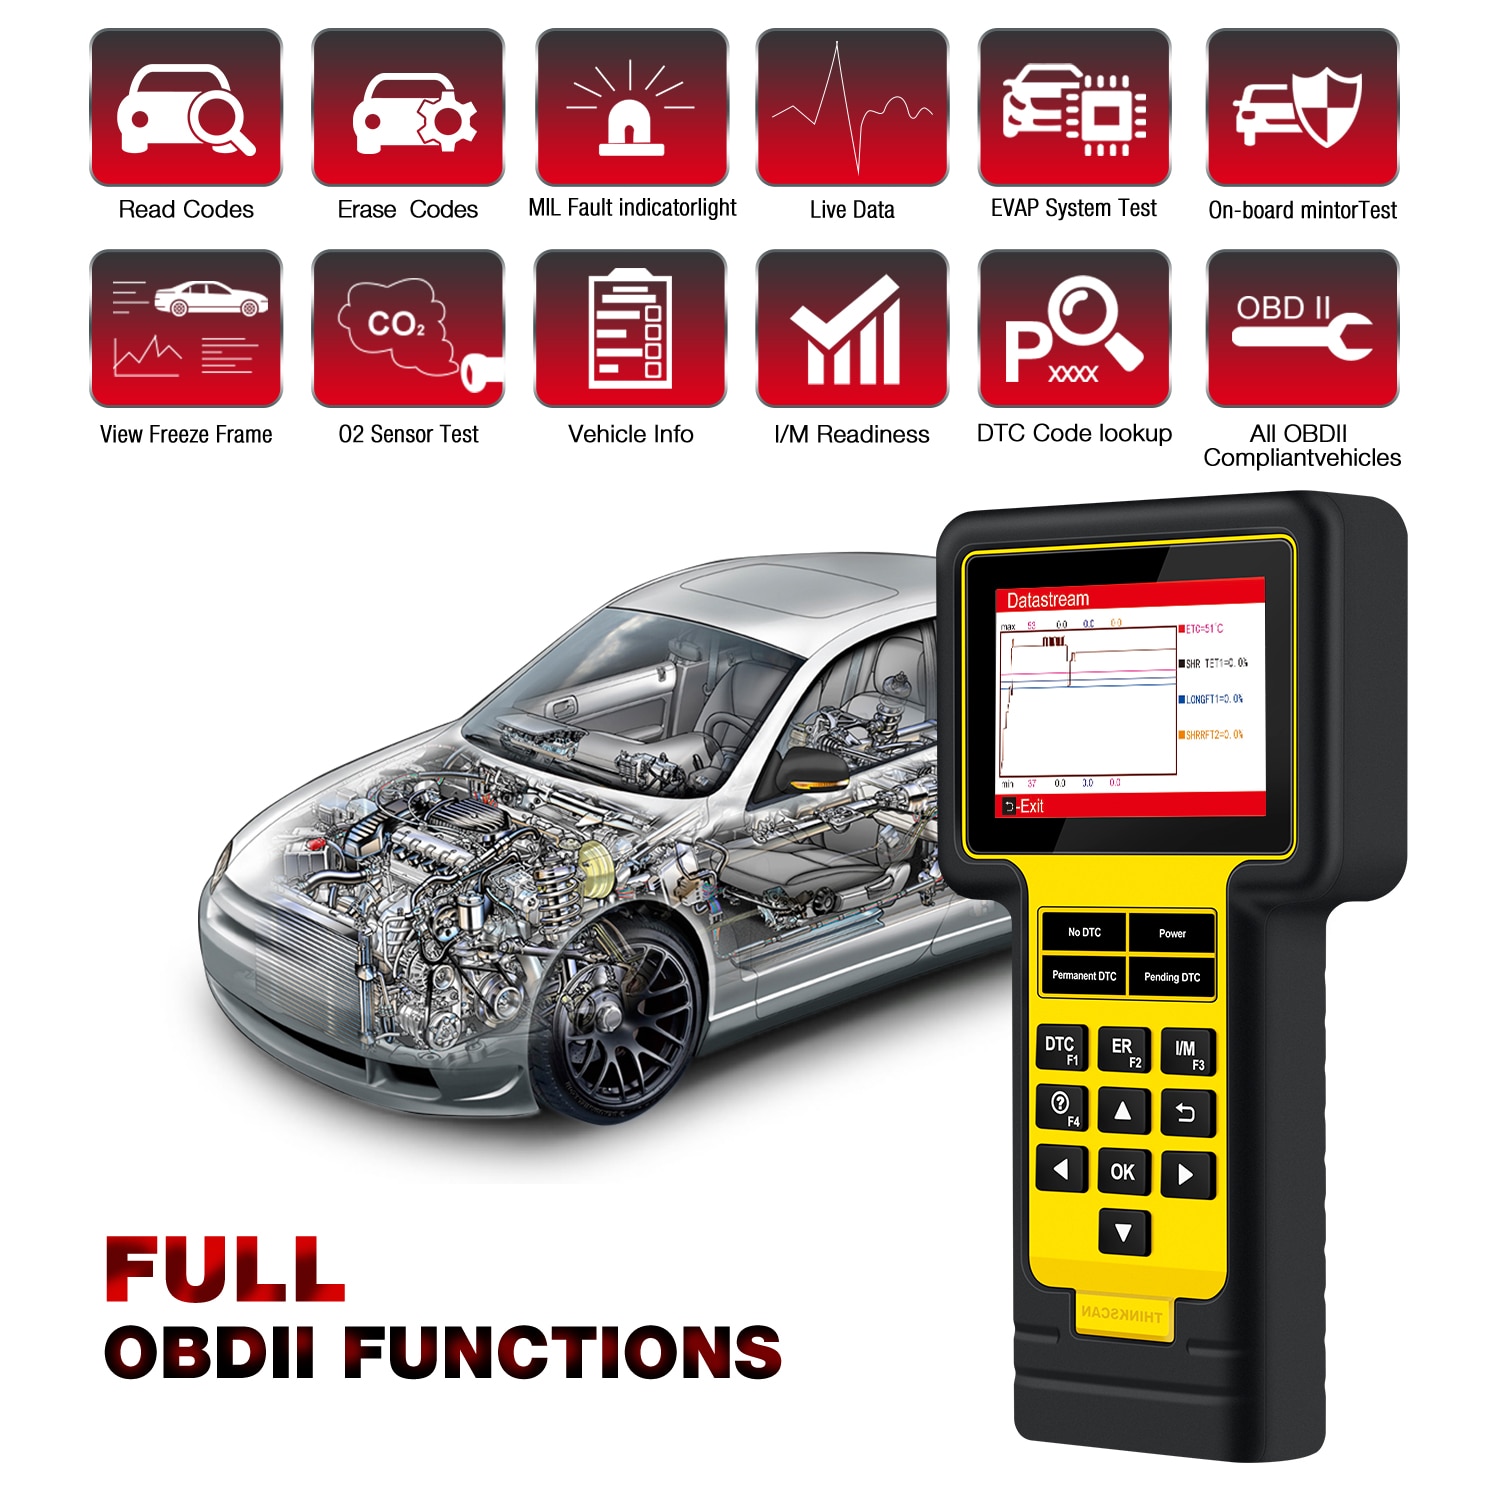 Thinkcar Thinkscan 600 ABS/SRS OBD2 Scanner